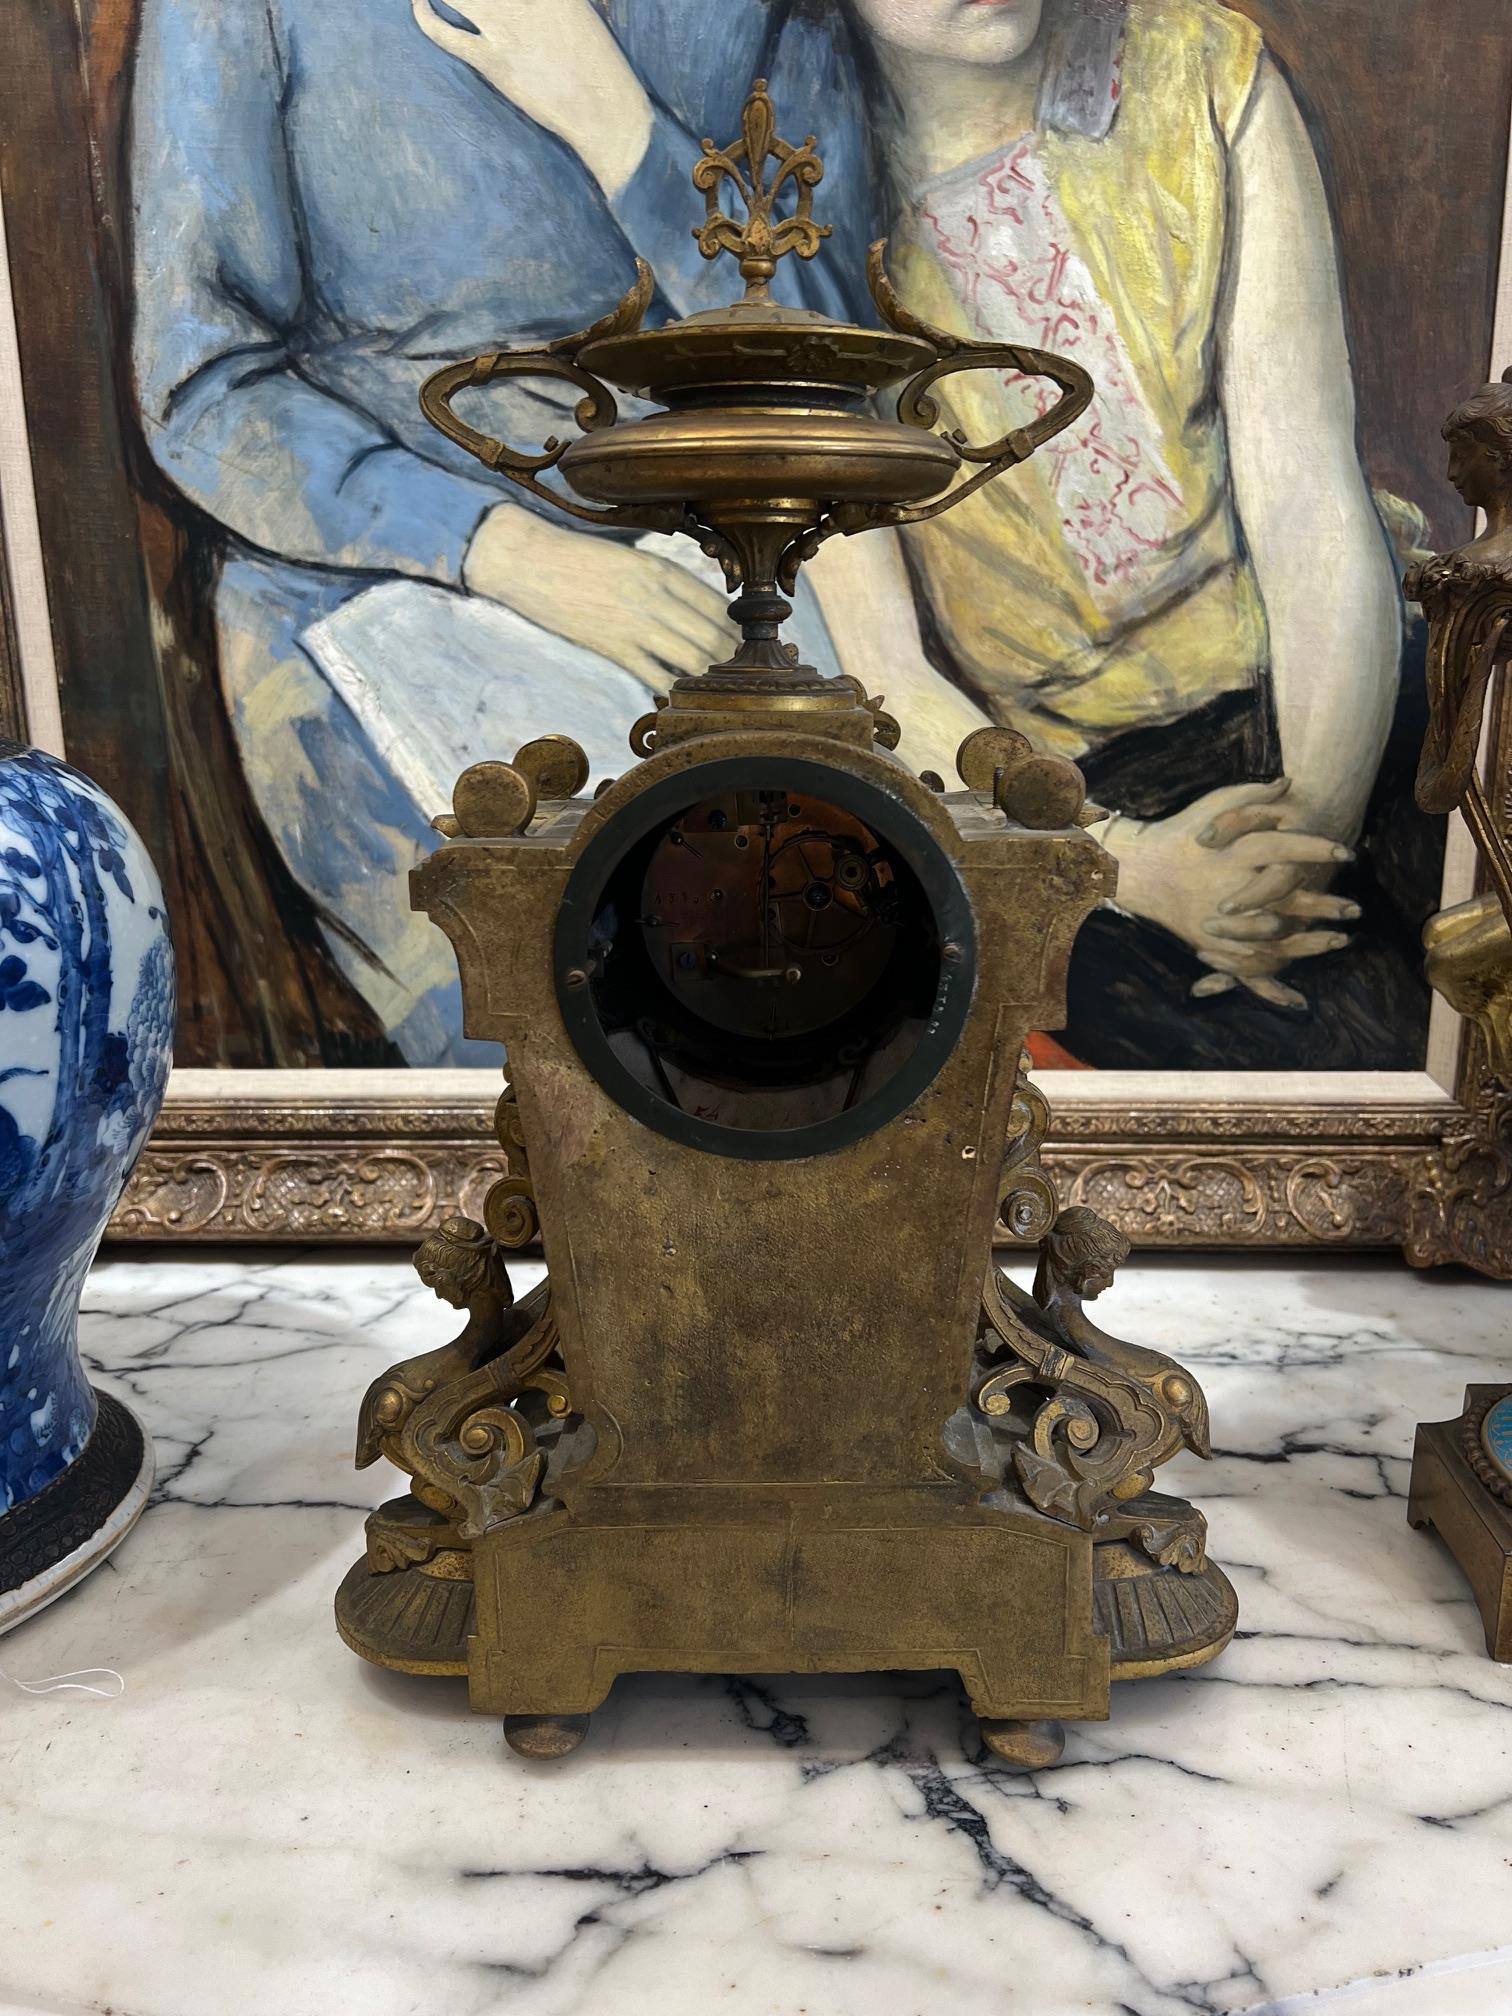 A LATE 19TH CENTURY FRENCH PORCELAIN MOUTED ORMOLU MANTEL CLOCK - Image 5 of 6